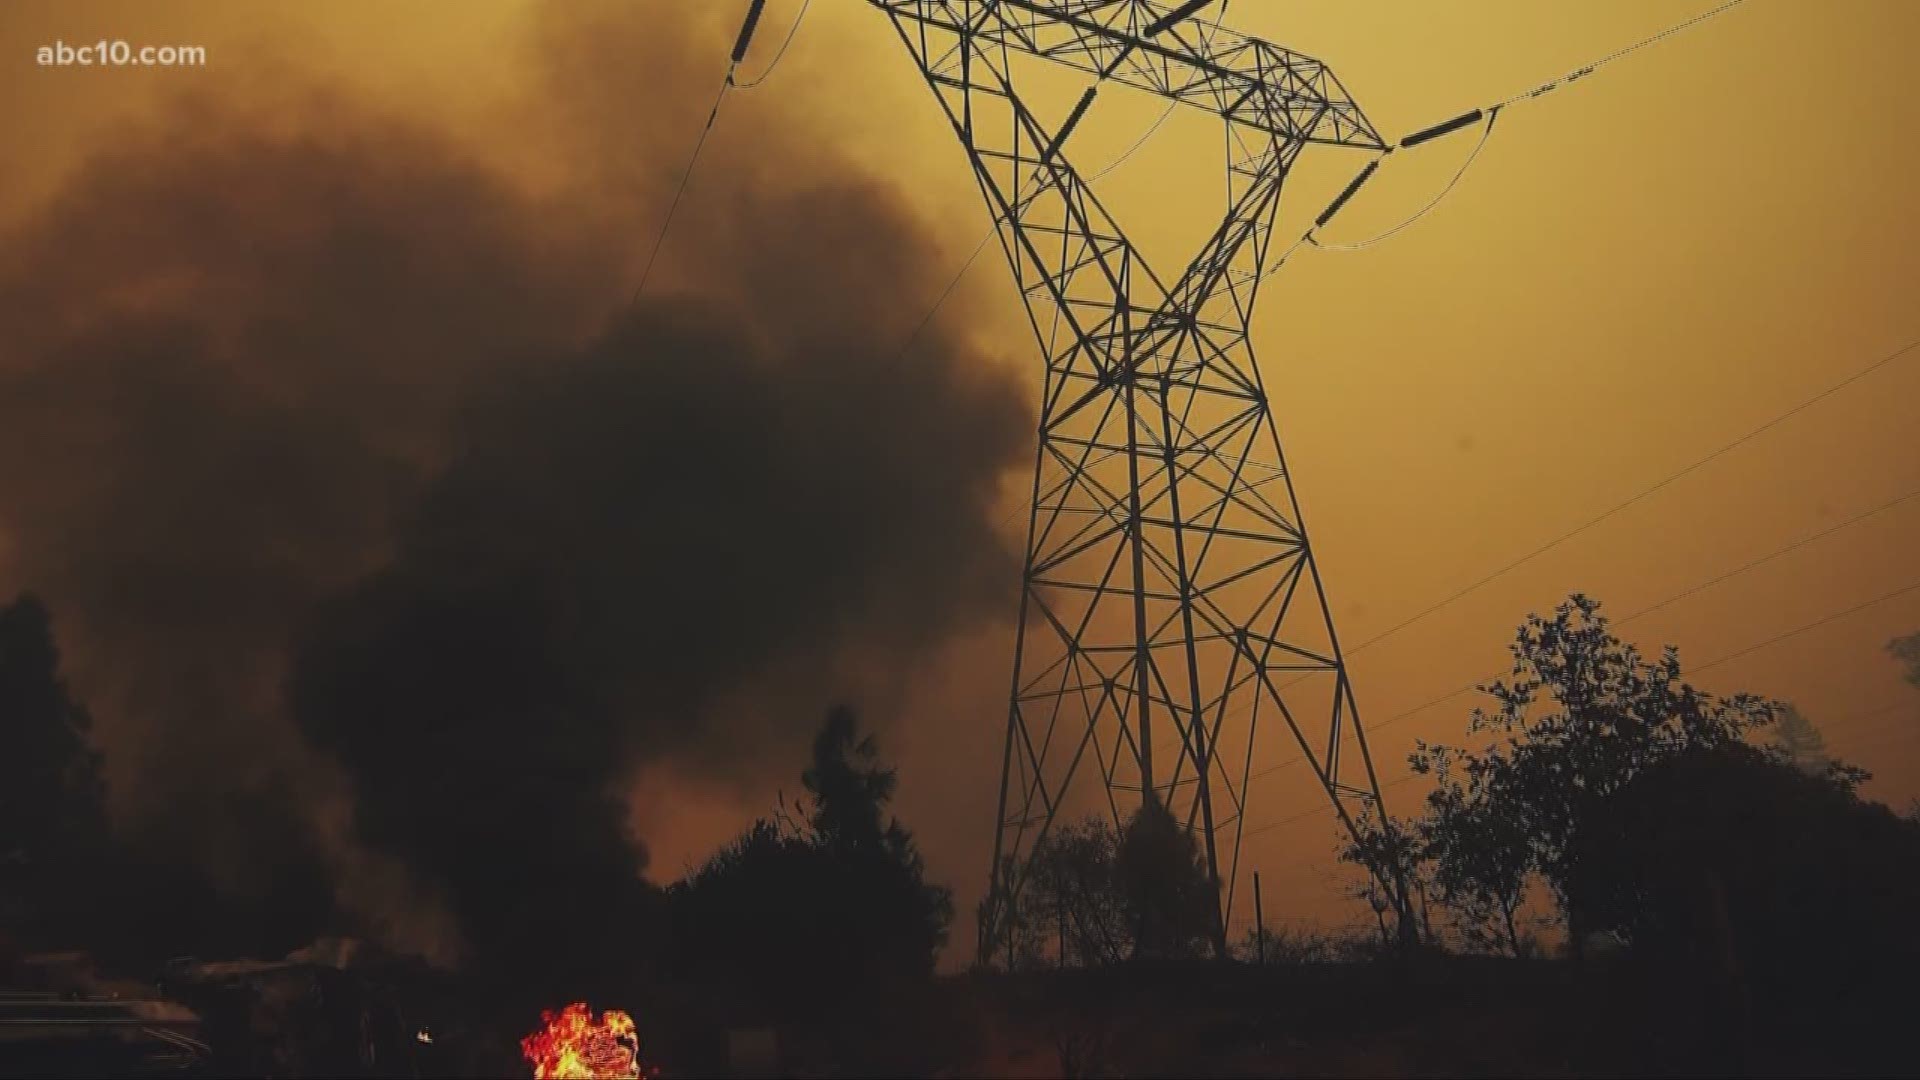 PG&E issued a written statement that stopped short of offering an apology, saying that the company "accepts" CAL FIRE's determination that it caused the devastating Camp Fire.